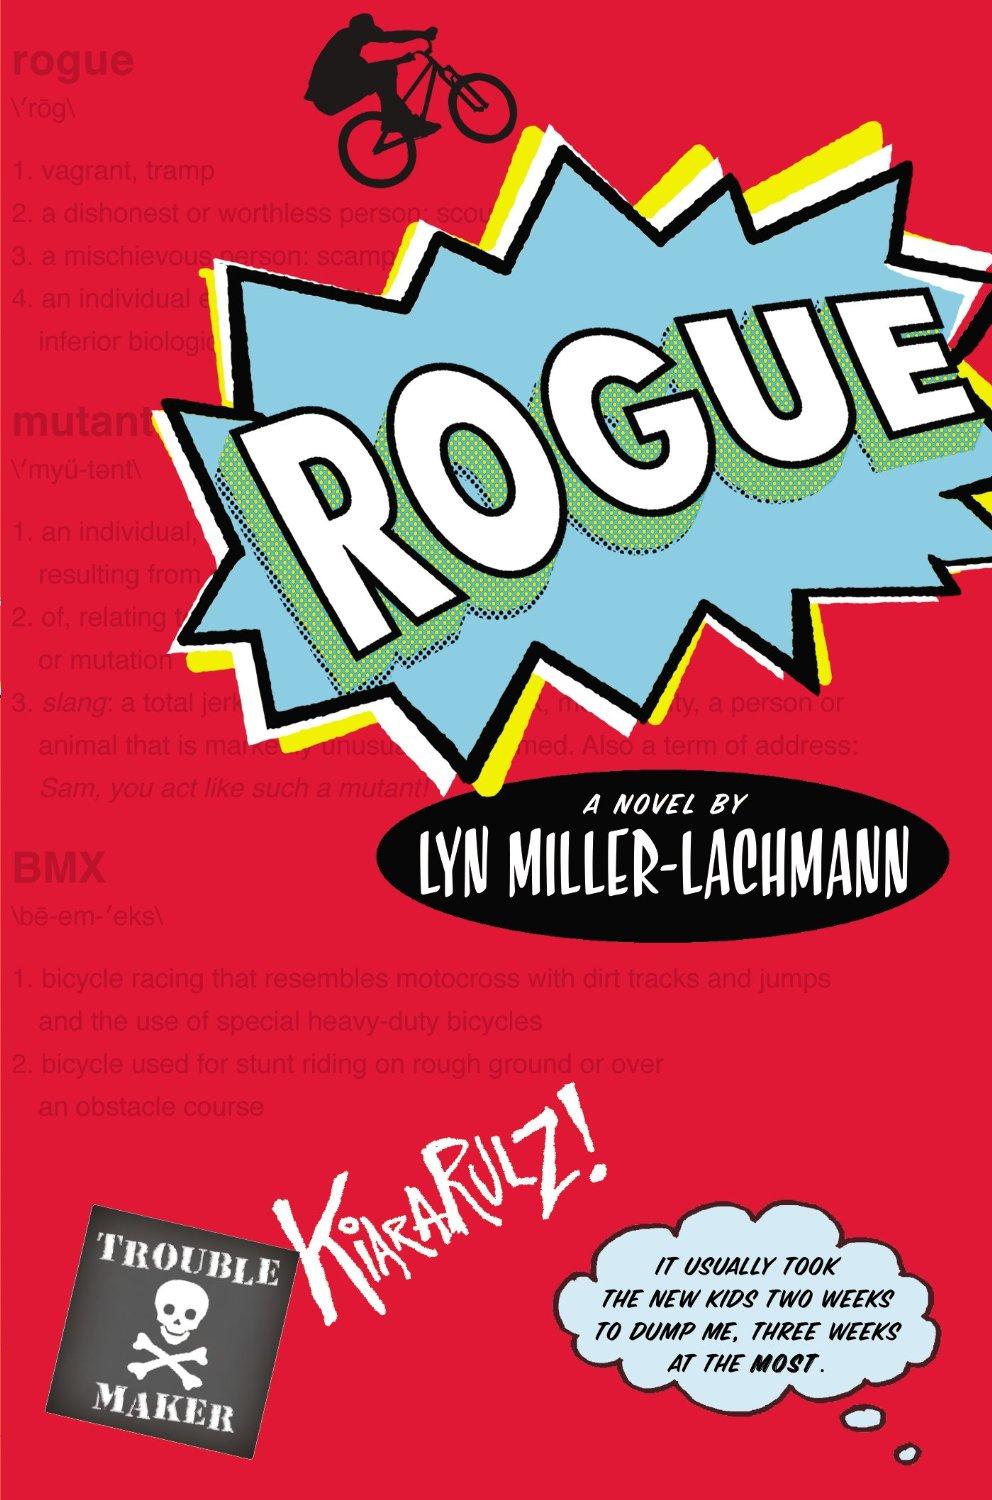 Review: Rogue by Lyn Miller-Lachmann